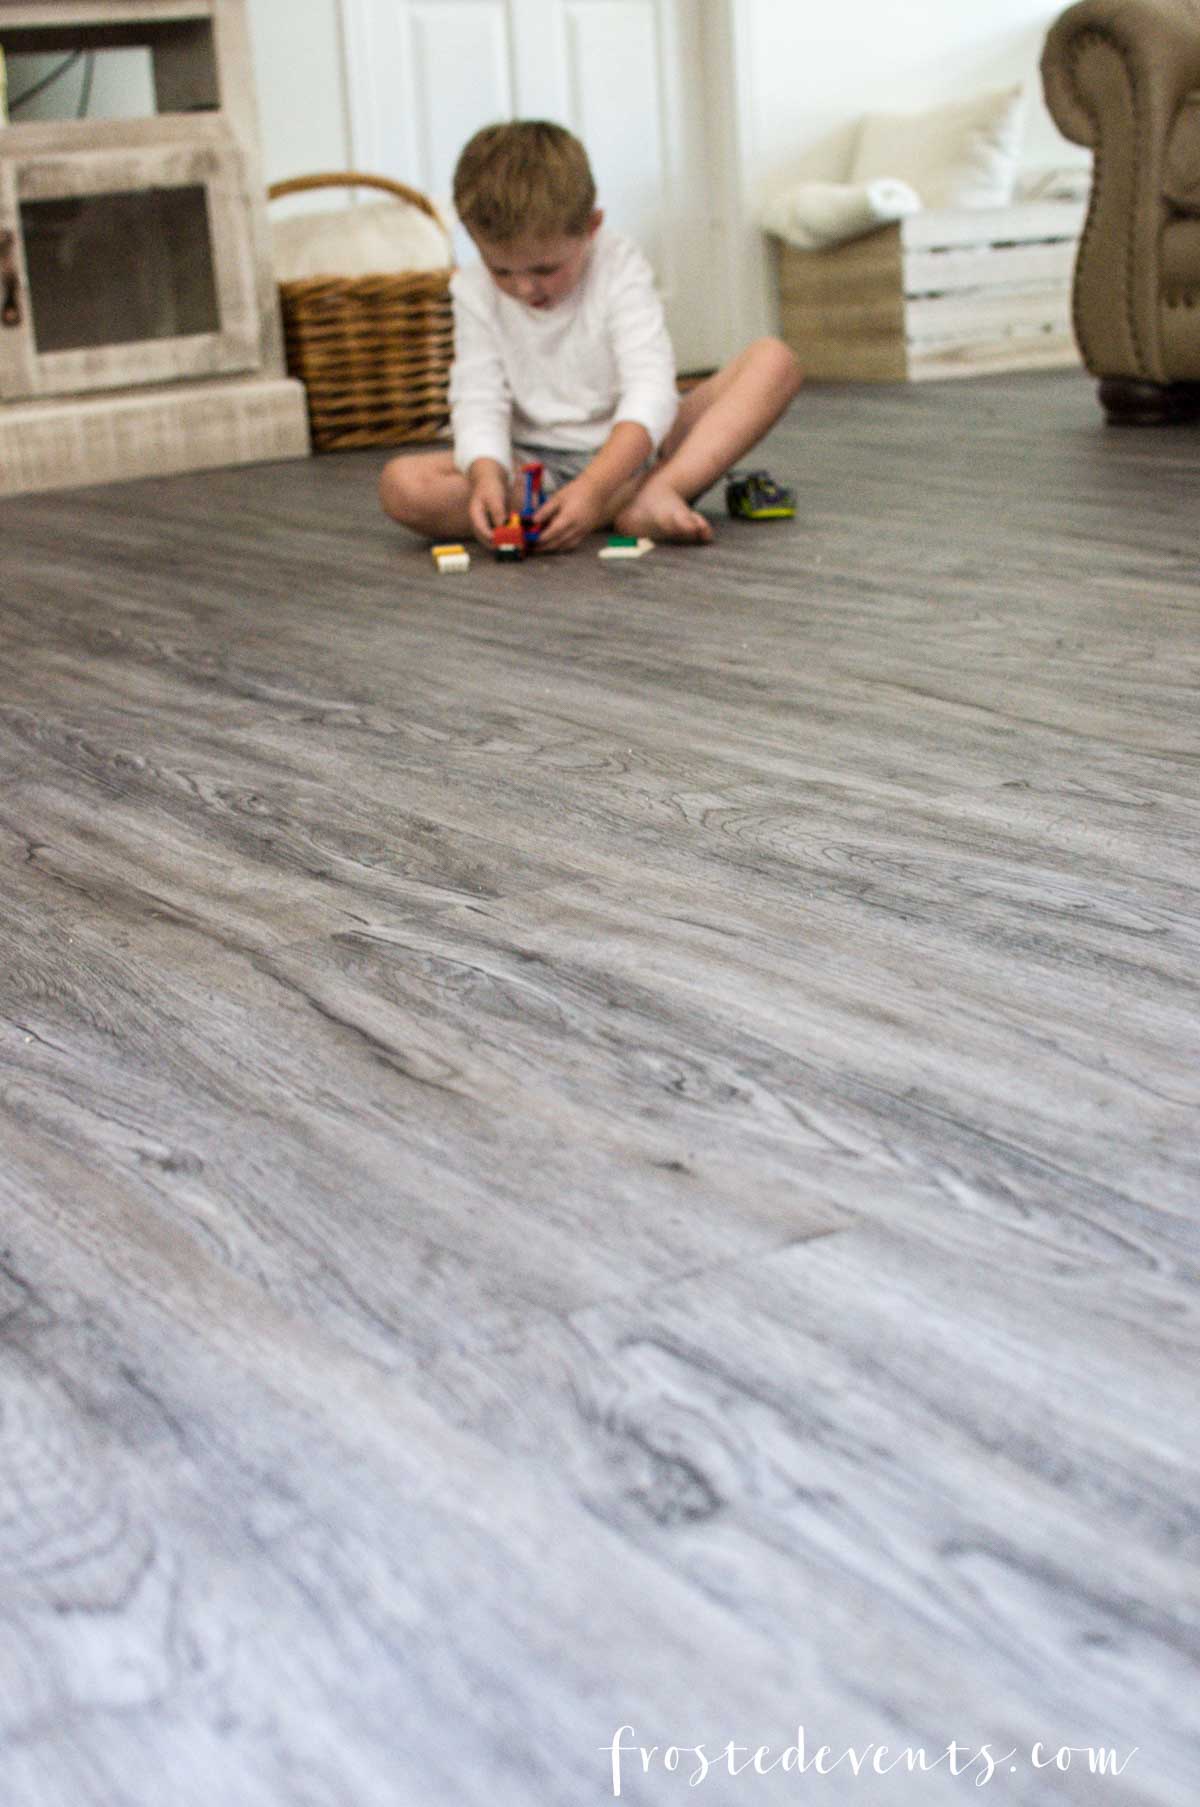 Luxury Vinyl Flooring Reveal! Our Latest Home Renovation DIY Project via Misty Nelson frostedblog